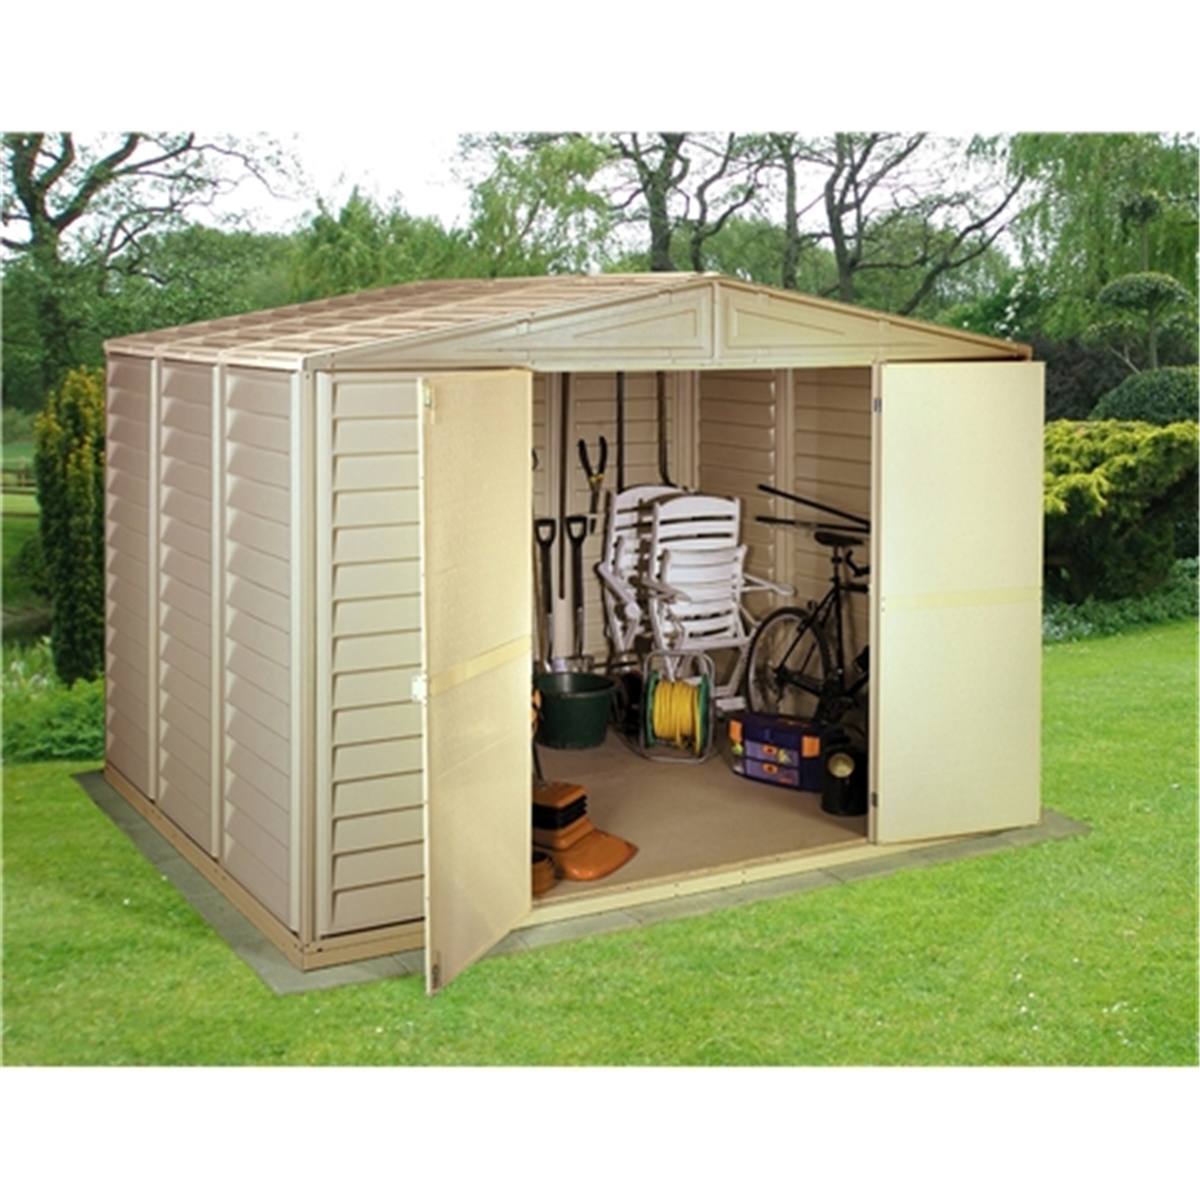 10 x 10 select duramax plastic pvc shed with steel frame